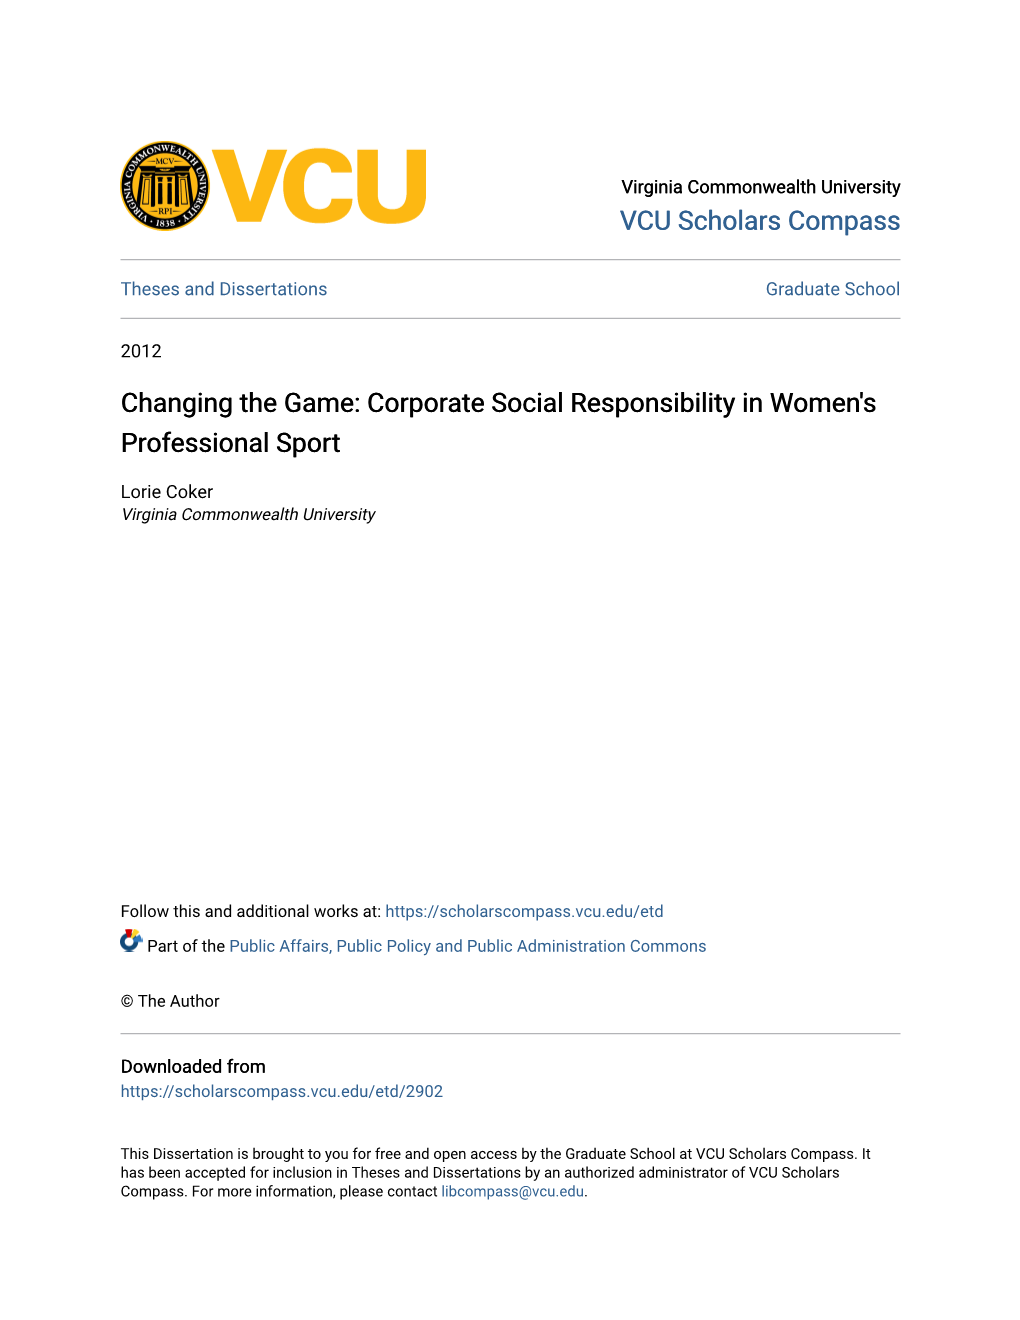 Corporate Social Responsibility in Women's Professional Sport